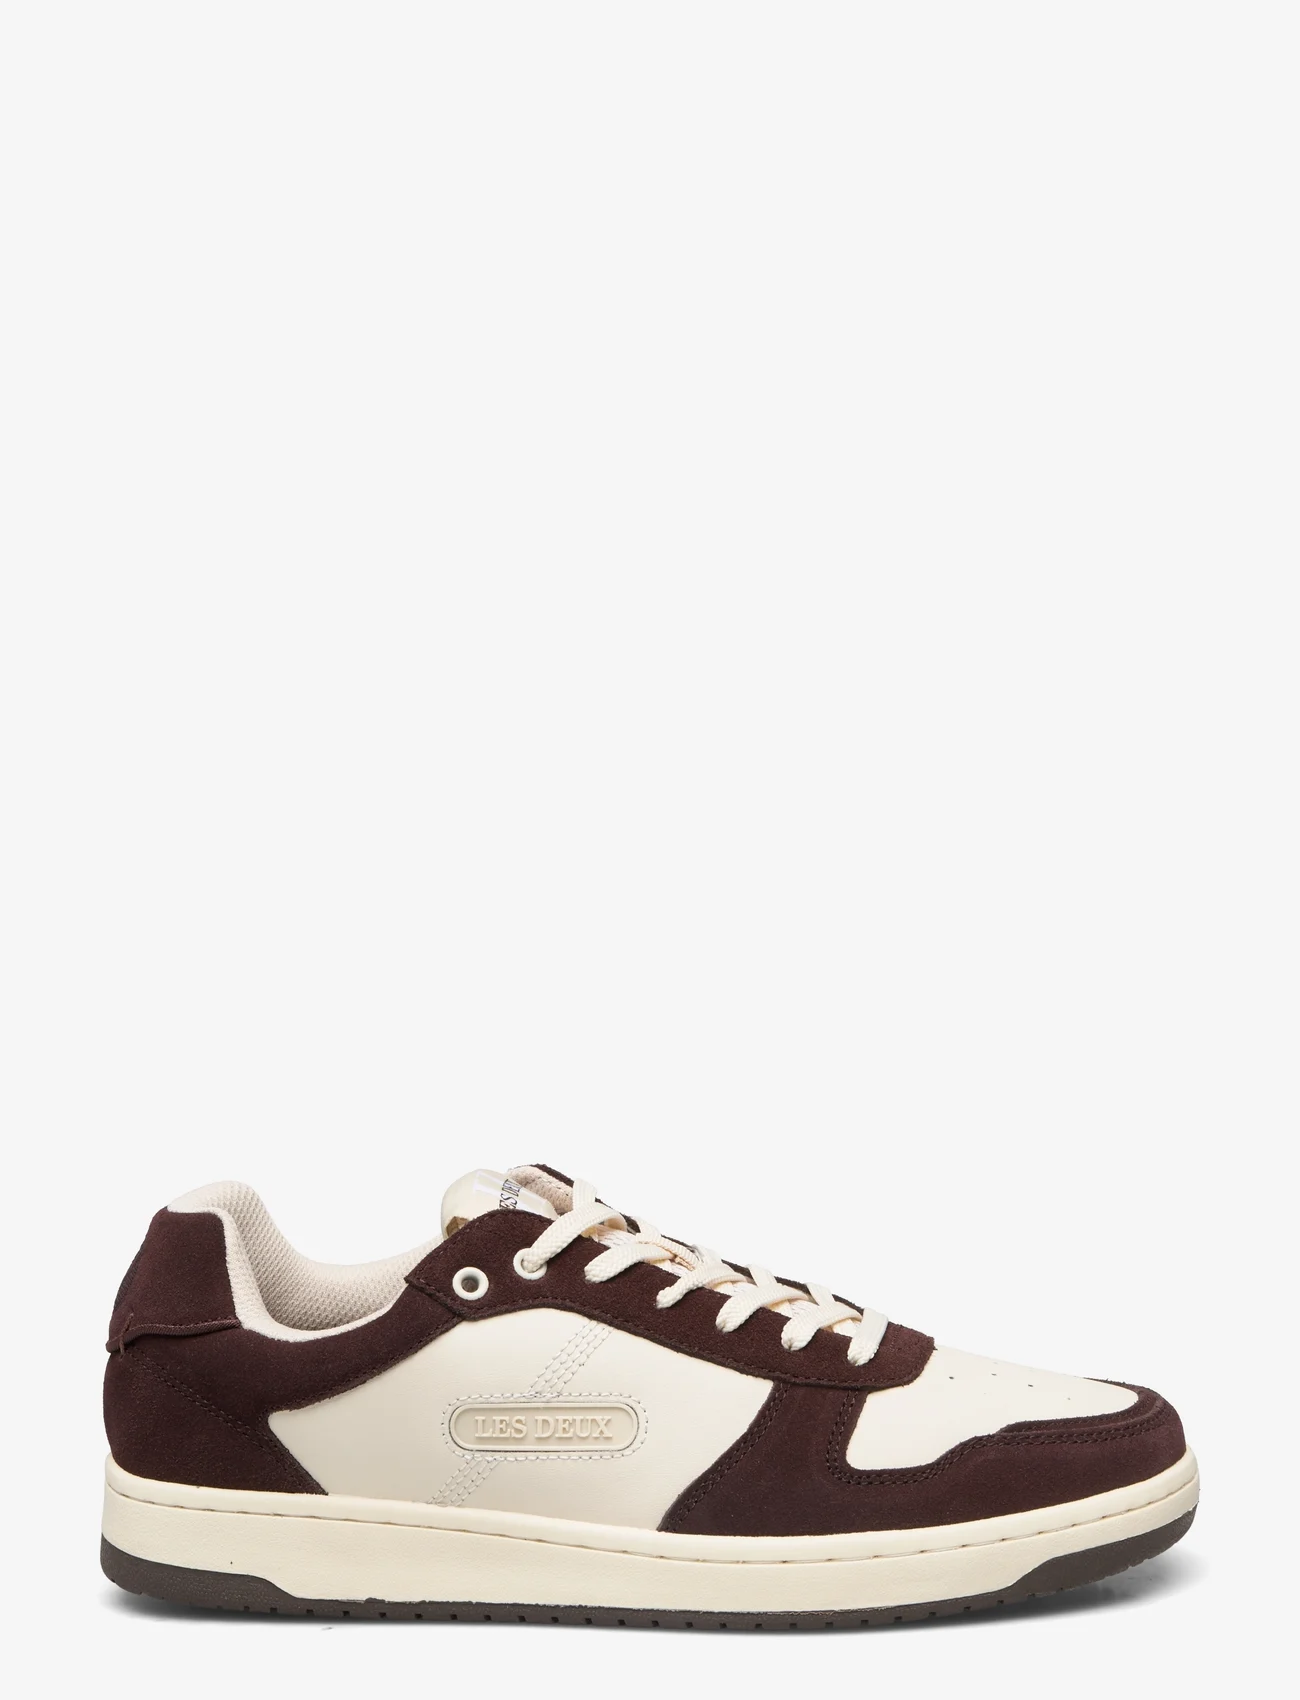 Les Deux - Wright Basketball Sneaker - lave sneakers - white/ebony brown - 1